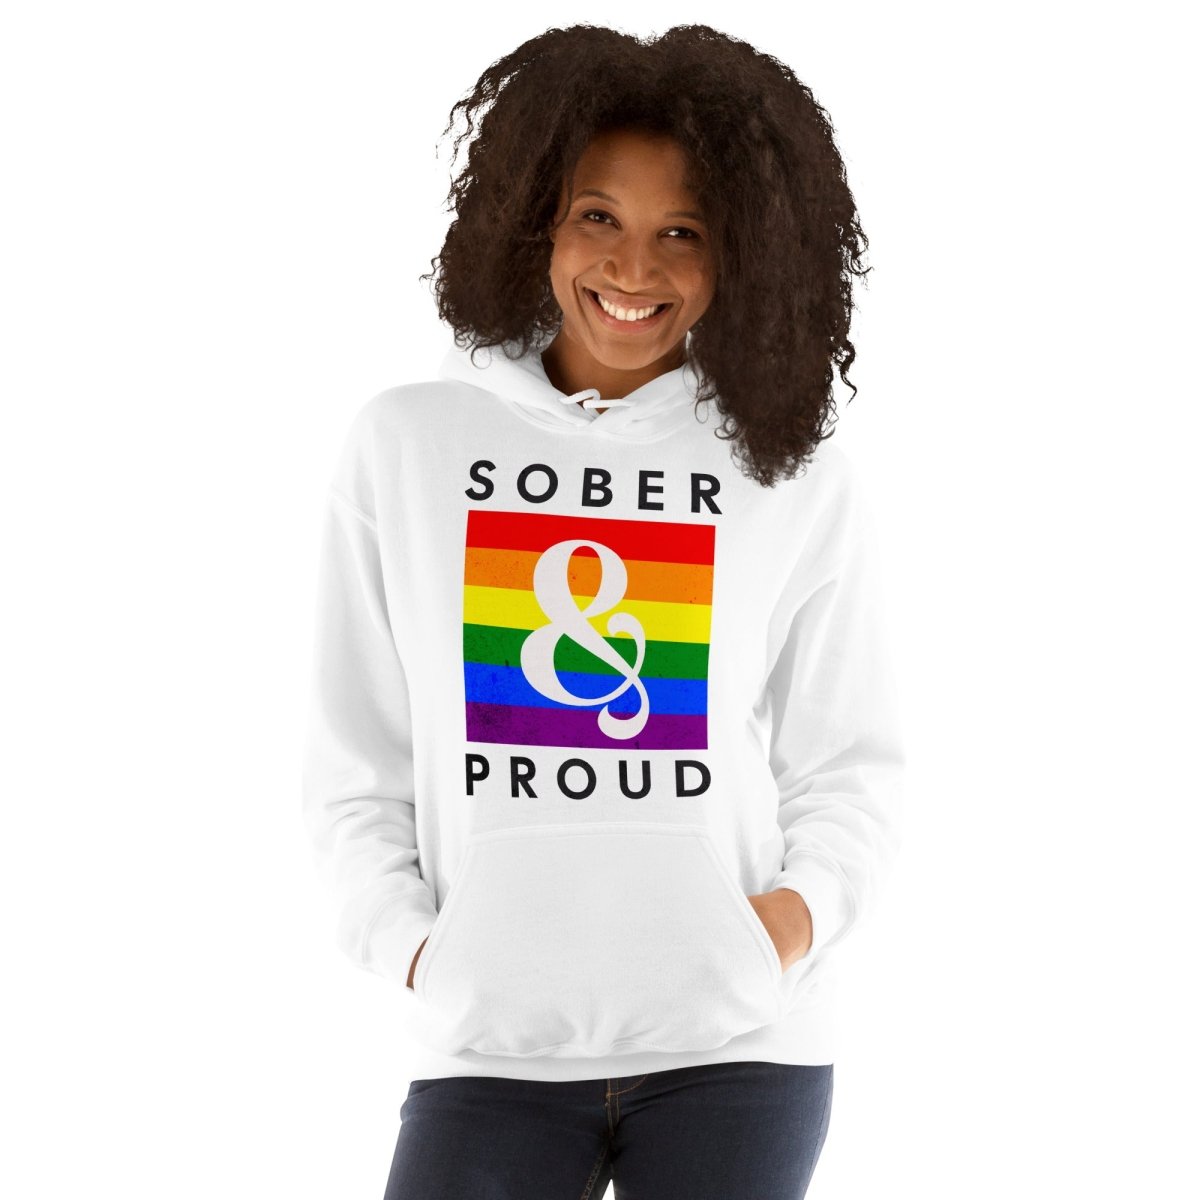 Sober & Proud Unisex Hoodie - Rainbow Resilience Collection - Sobervation